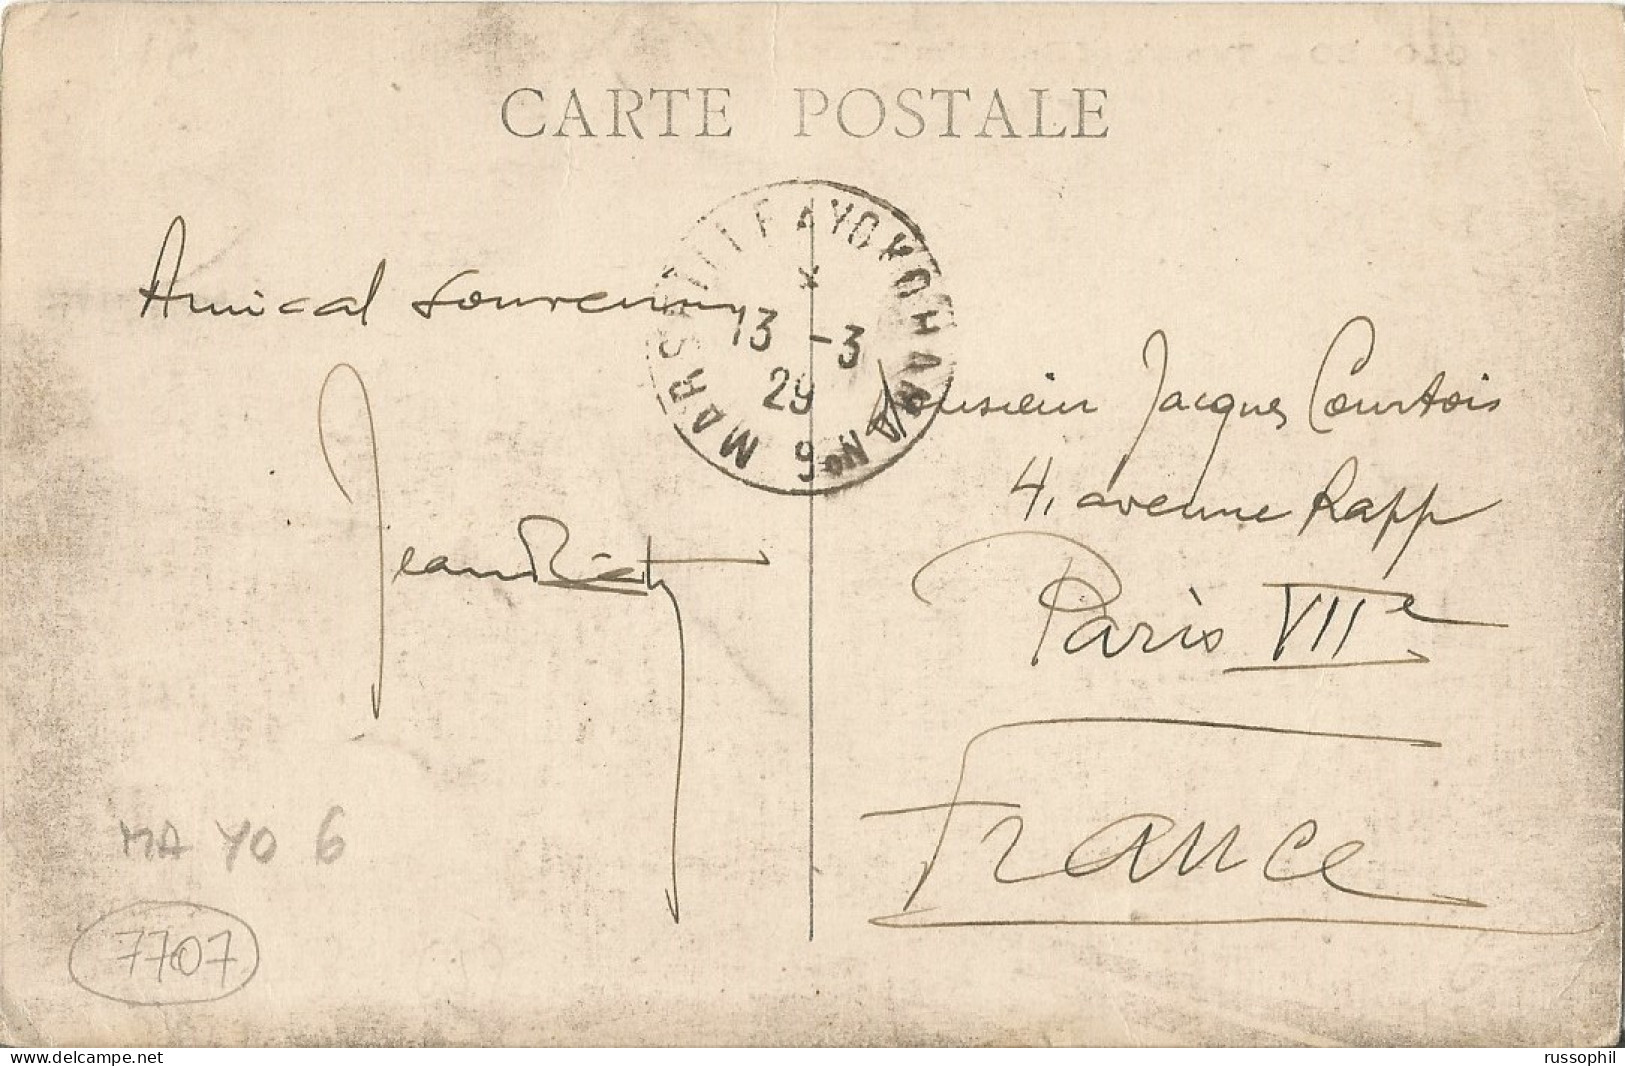 FRANCE - SEA POST - “MARSEILLE TO YOKOHAMA" DEPARTURE CDS ON FRANKED PC (VIEW OF CEYLON / COLOMBO) TO FRANCE - 1929 - Schiffspost